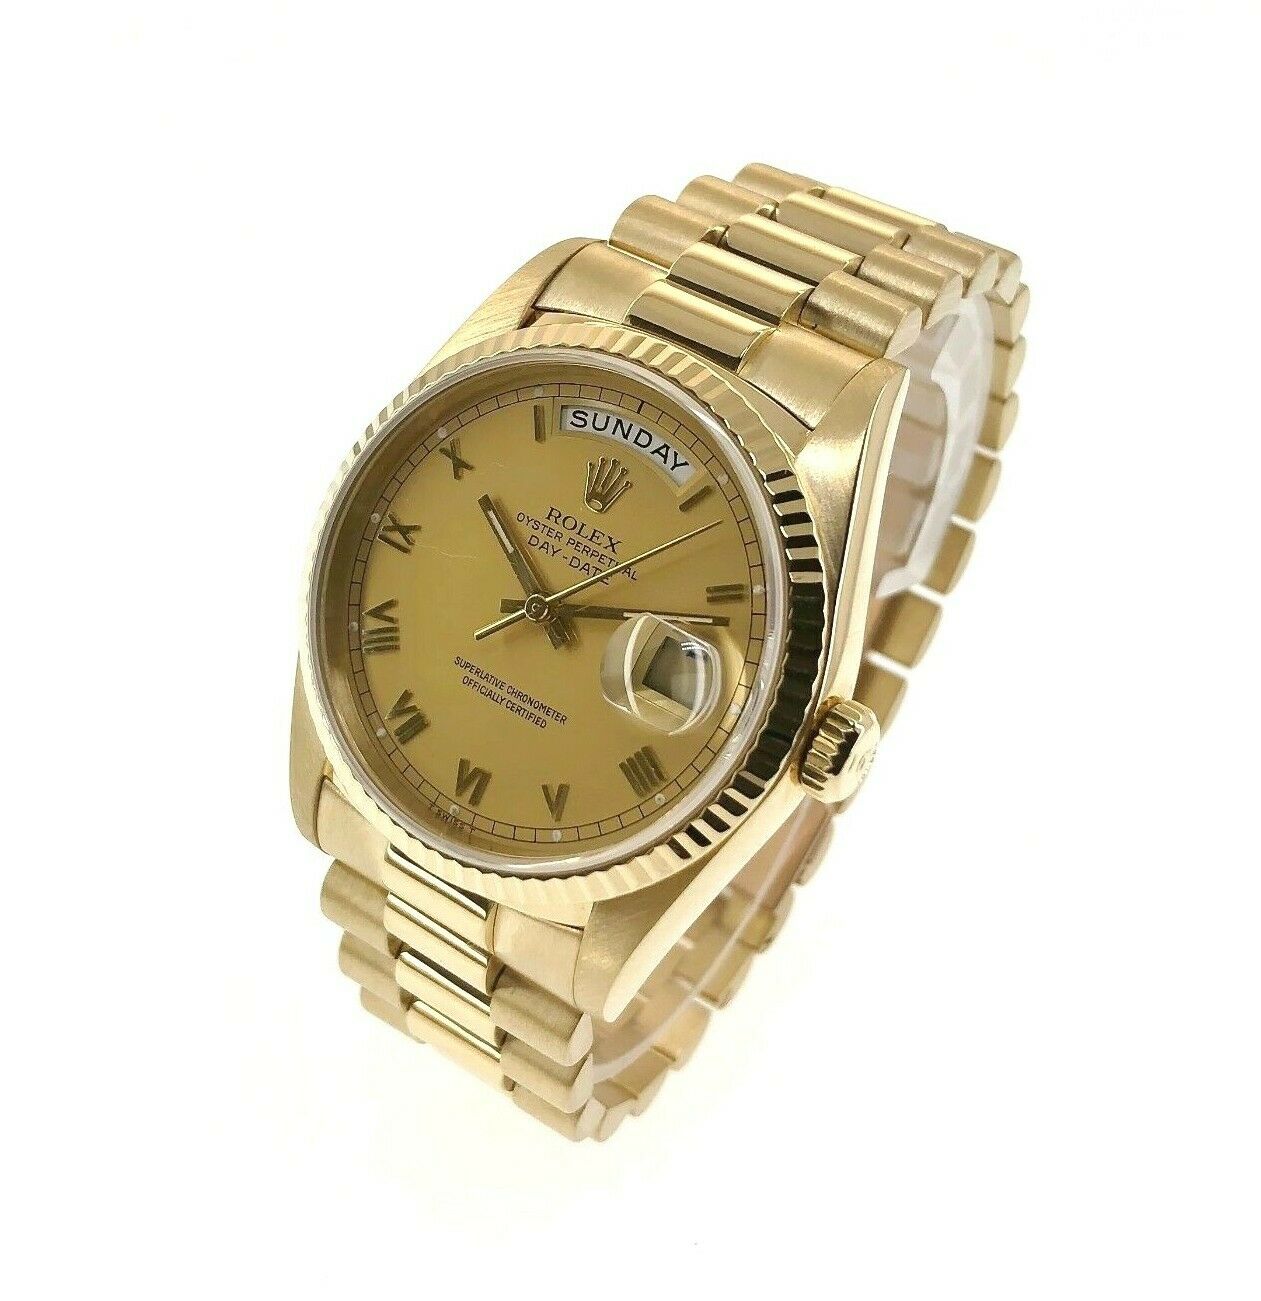 Rolex Day Date President 18K Yellow Gold 36mm Watch 18238 Factory Champ Dial DQS